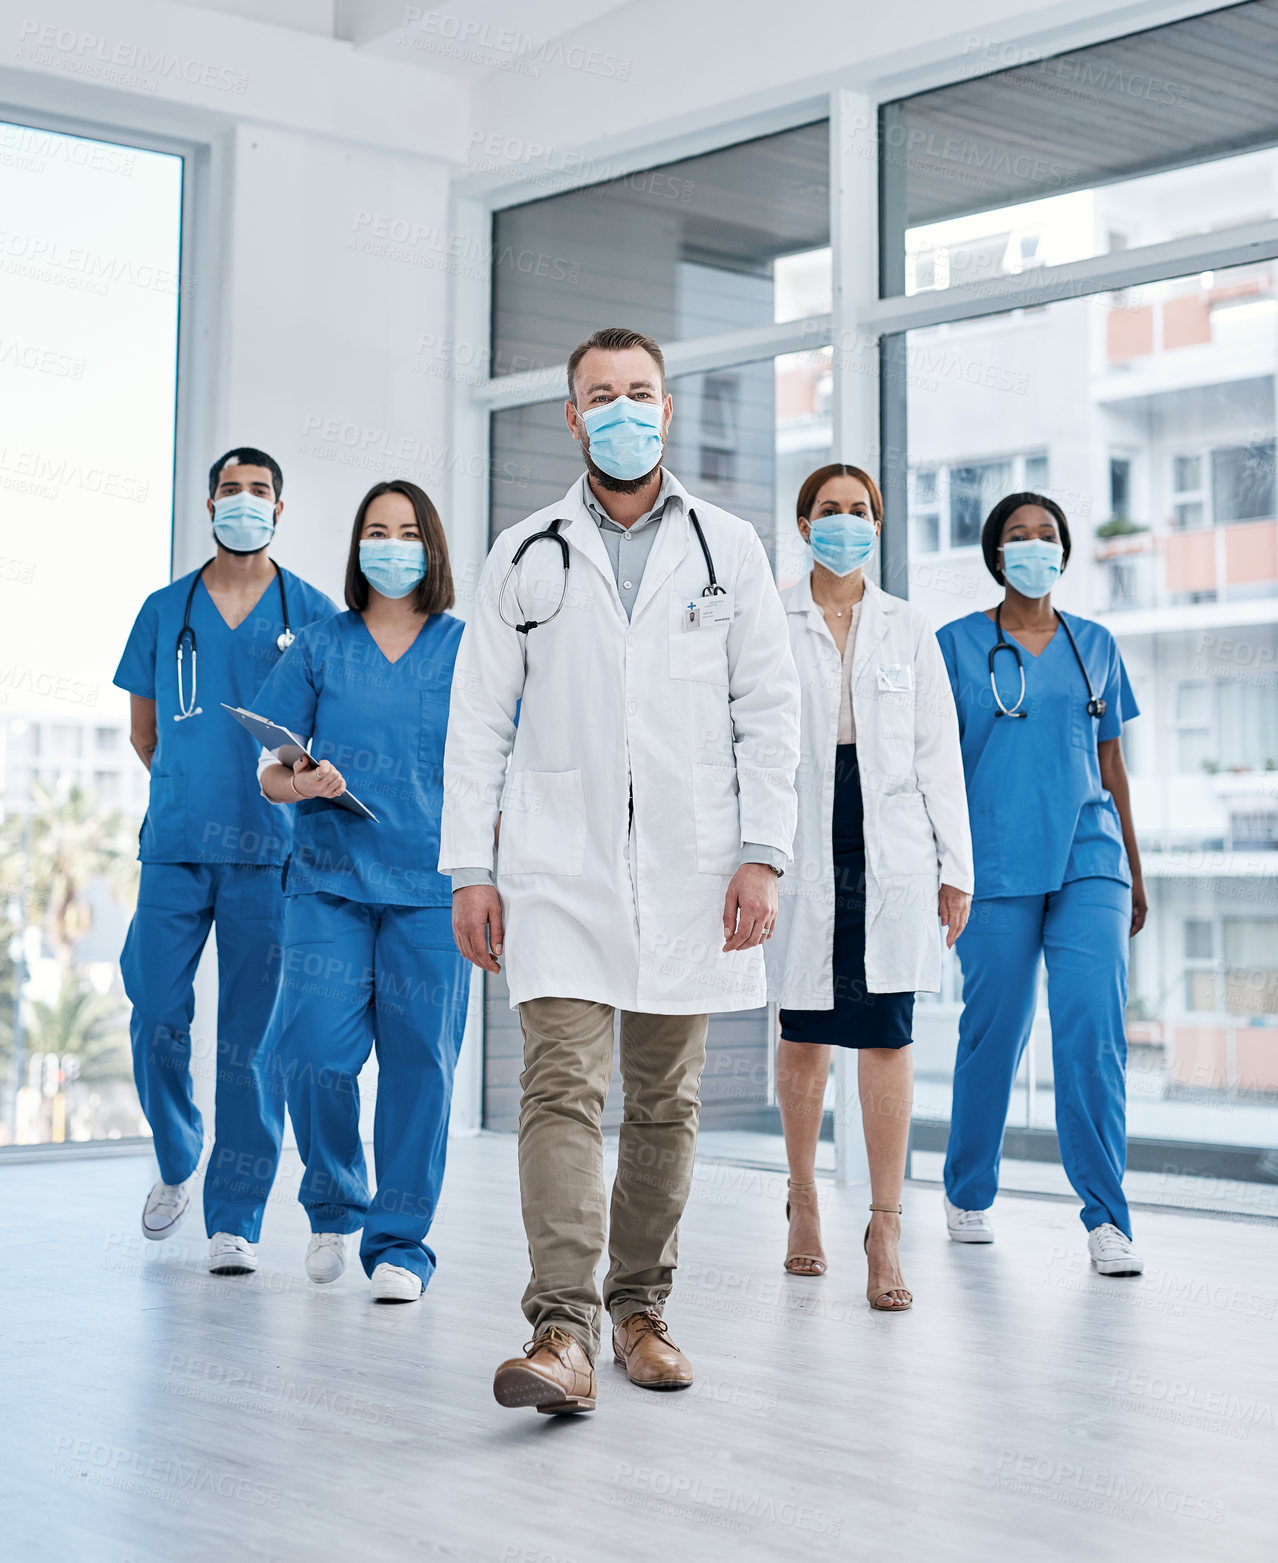 Buy stock photo Shot of a group of medical practitioners wearing face masks while walking in a hospital